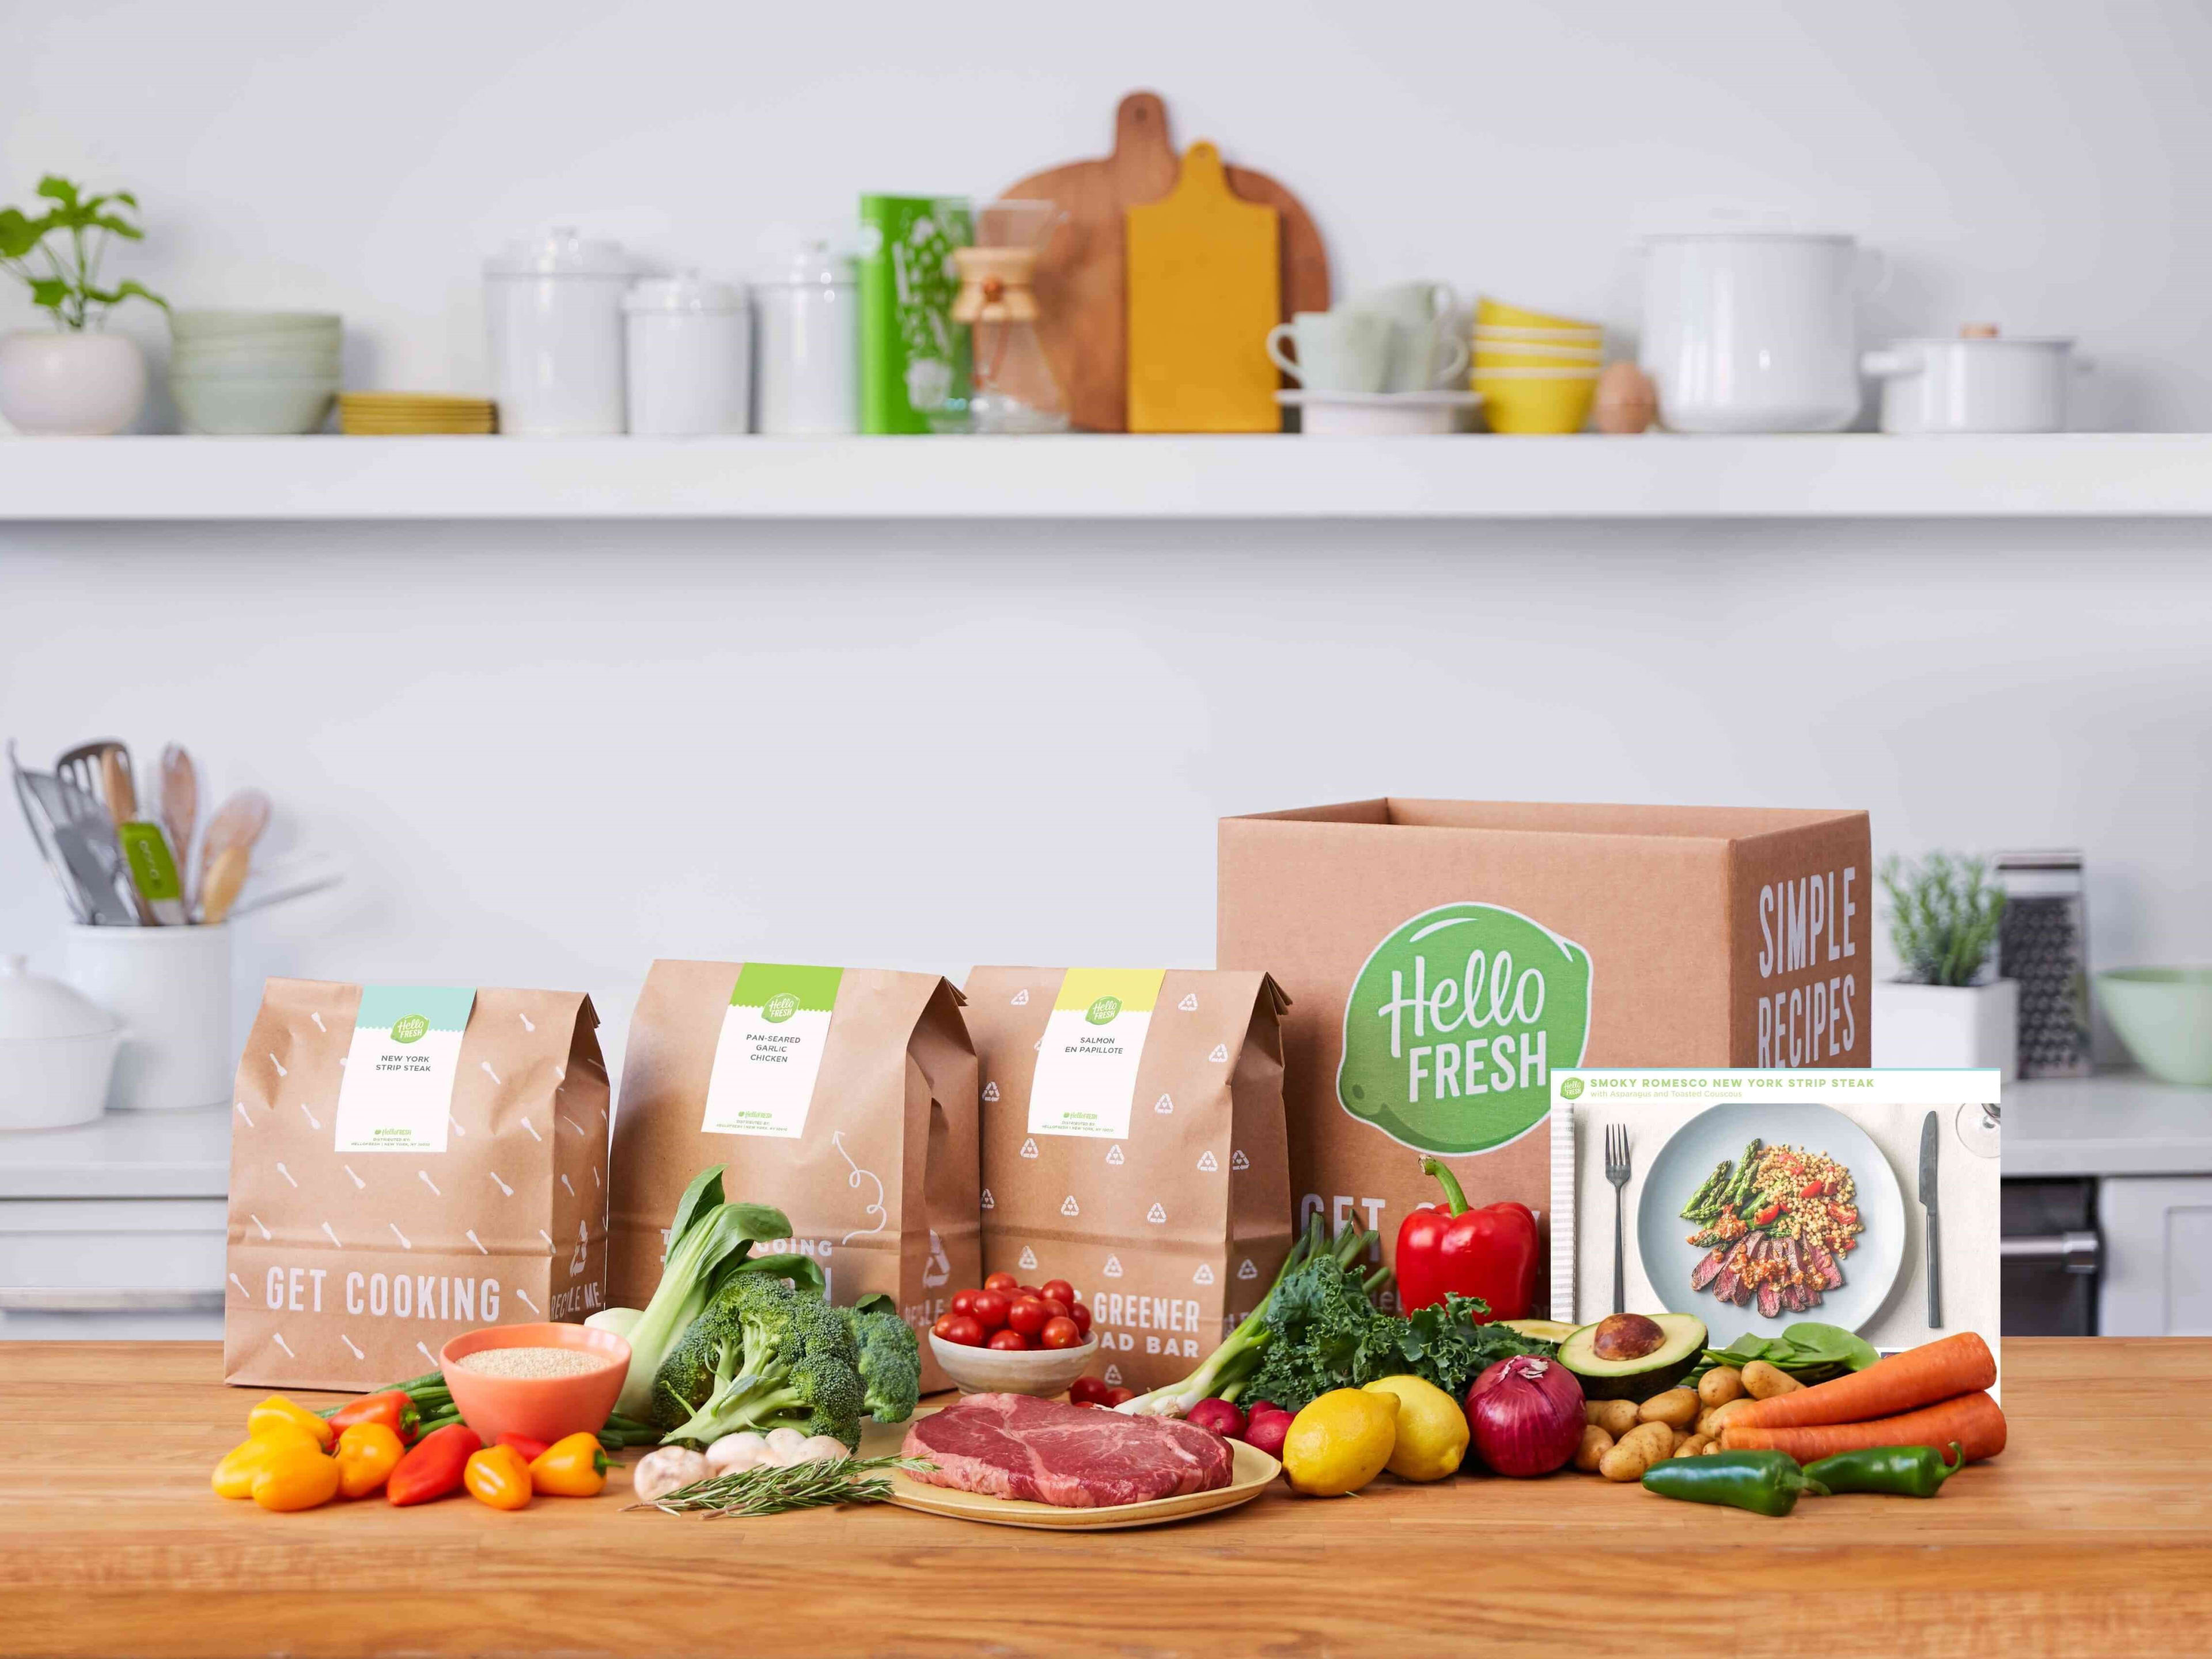 Affordable meal kits made for your taste buds